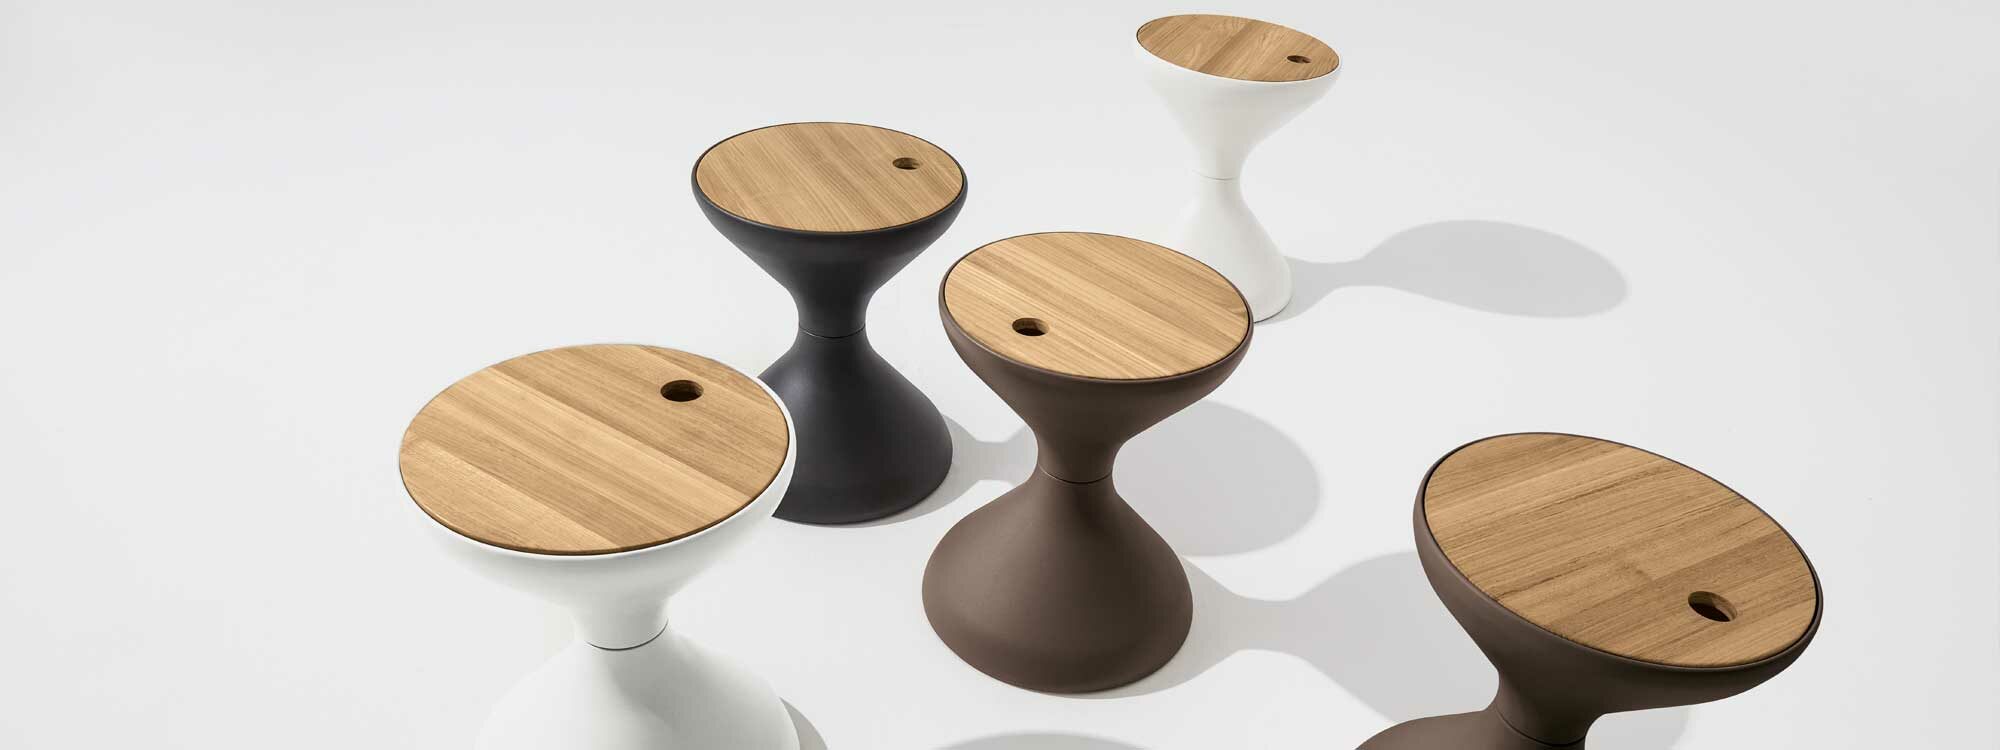 Studio image of several Bells garden side tables and ice buckets by Gloster garden furniture